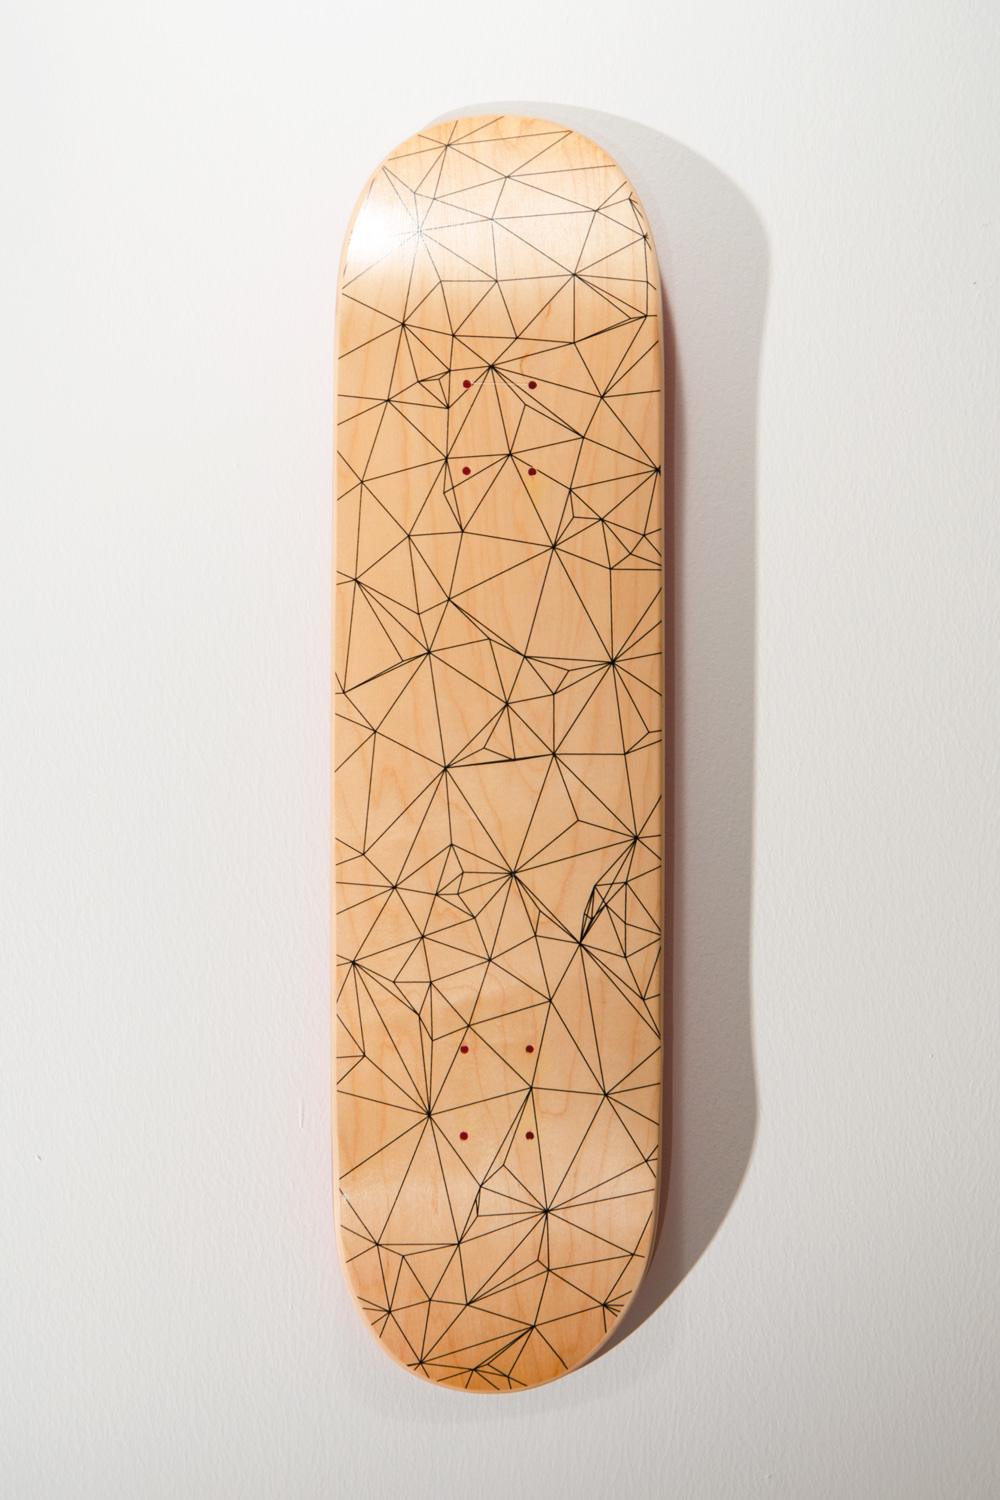 2012_T_Atwell_GenSk8_Prismatic_Lines.jpg